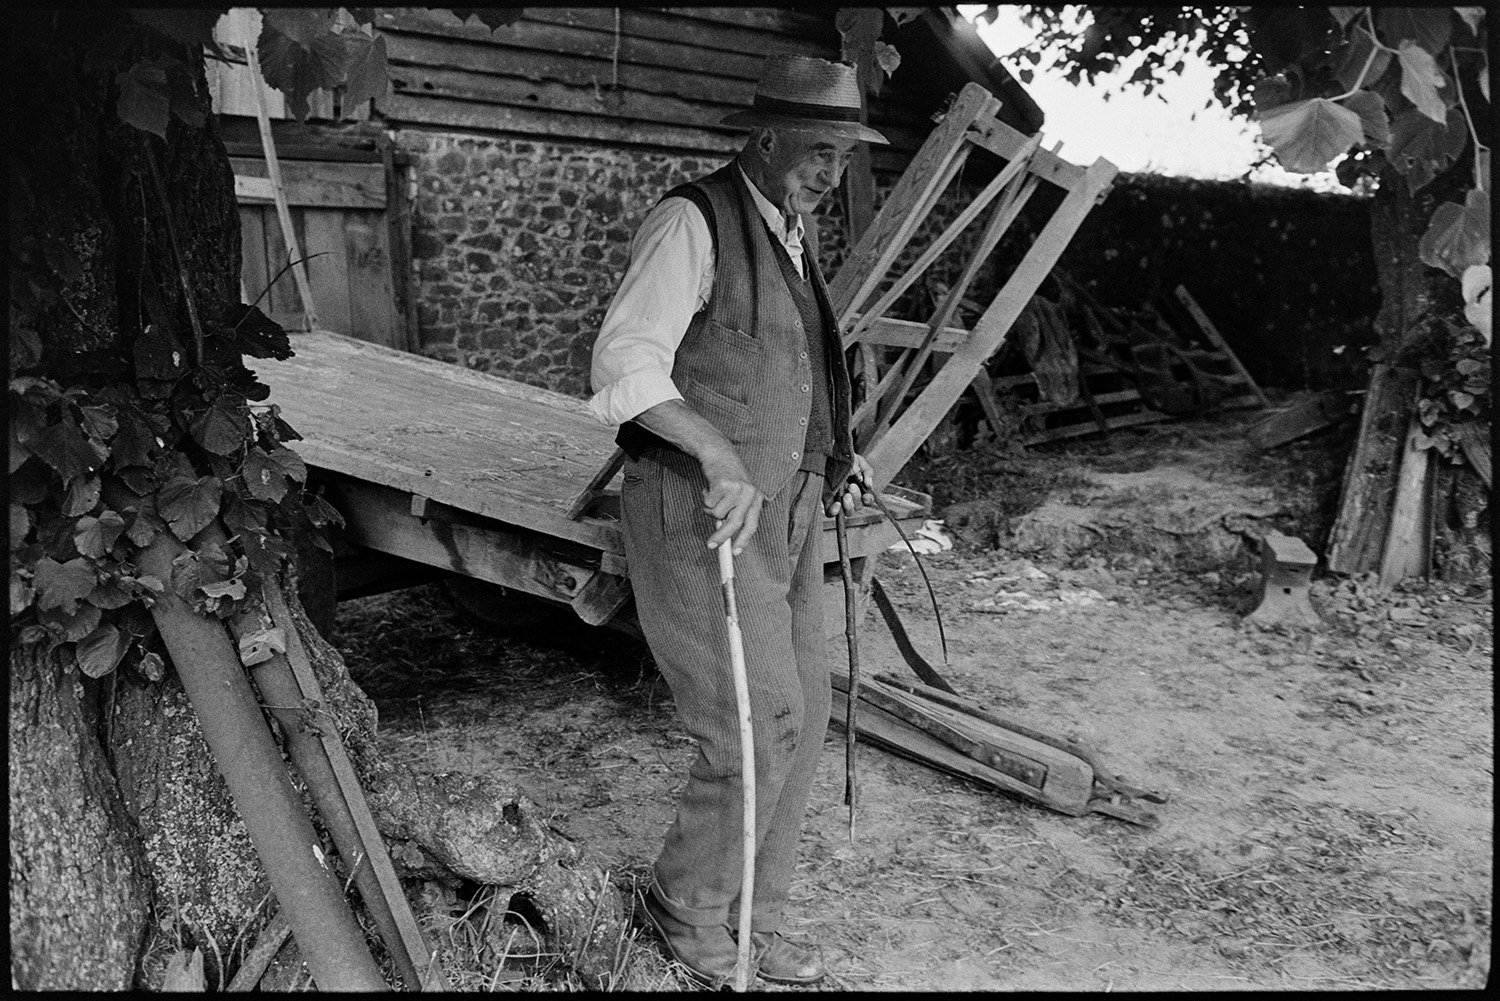 Various groups and shots of farming family. 
[Mr Crocker walking past a trailer and barn at Deckport, Hatherleigh. He is using a walking stick.]